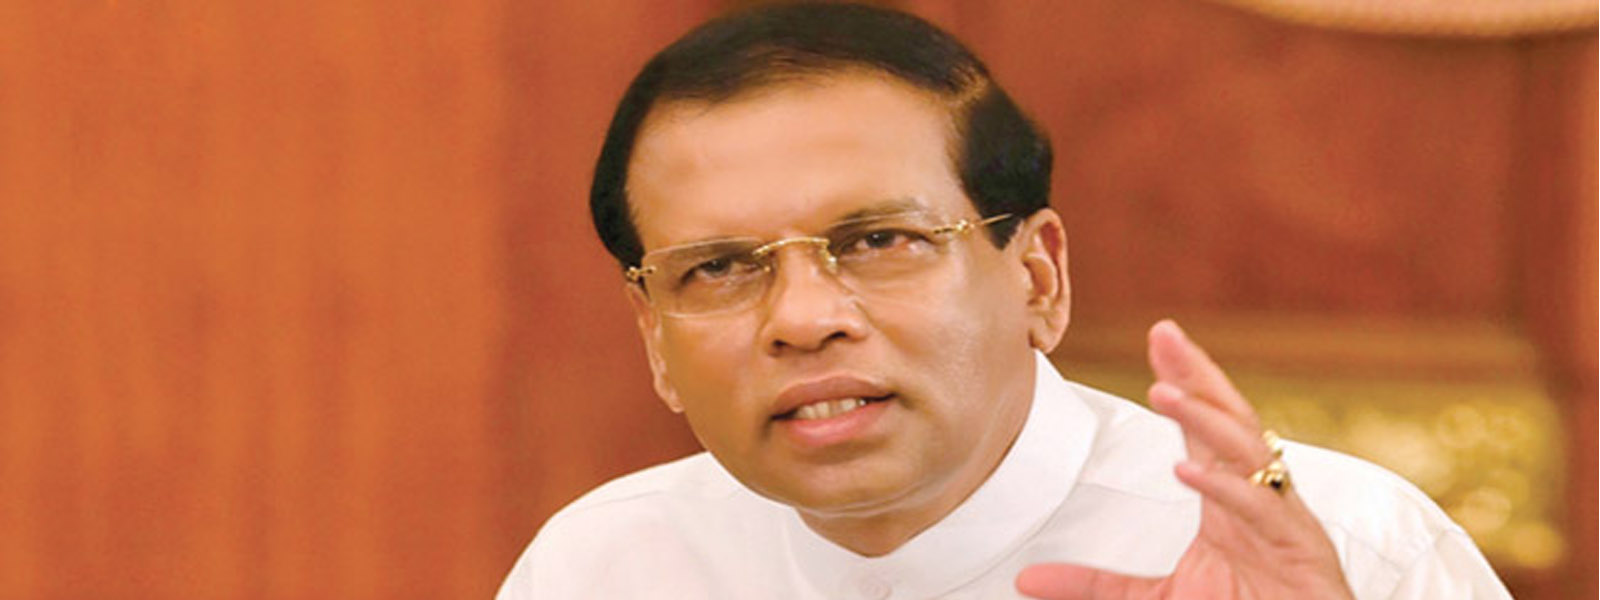 President gives ultimatum to PM at meeting